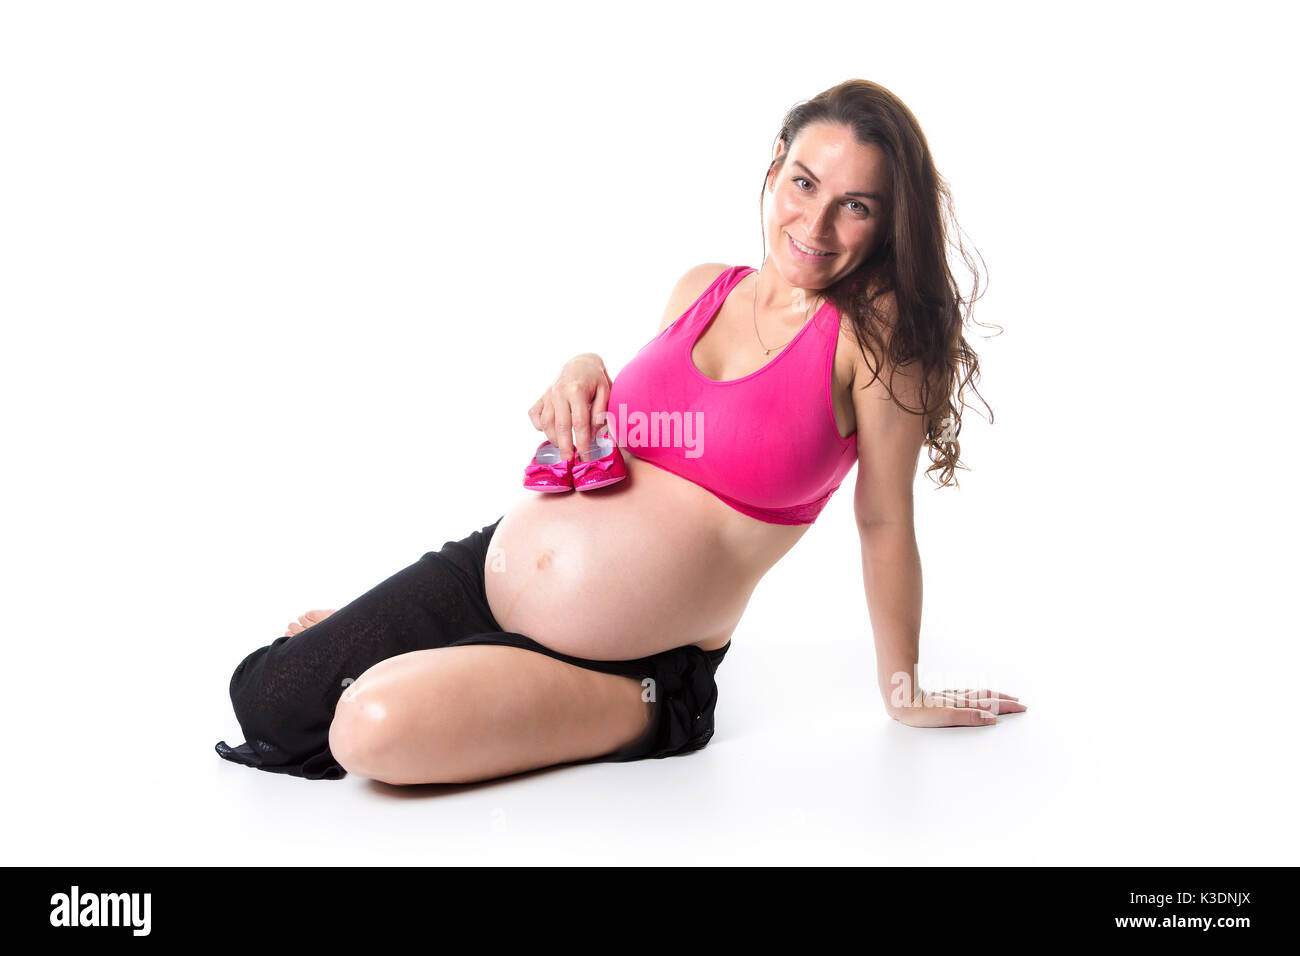 pregnant woman belly over white background Stock Photo